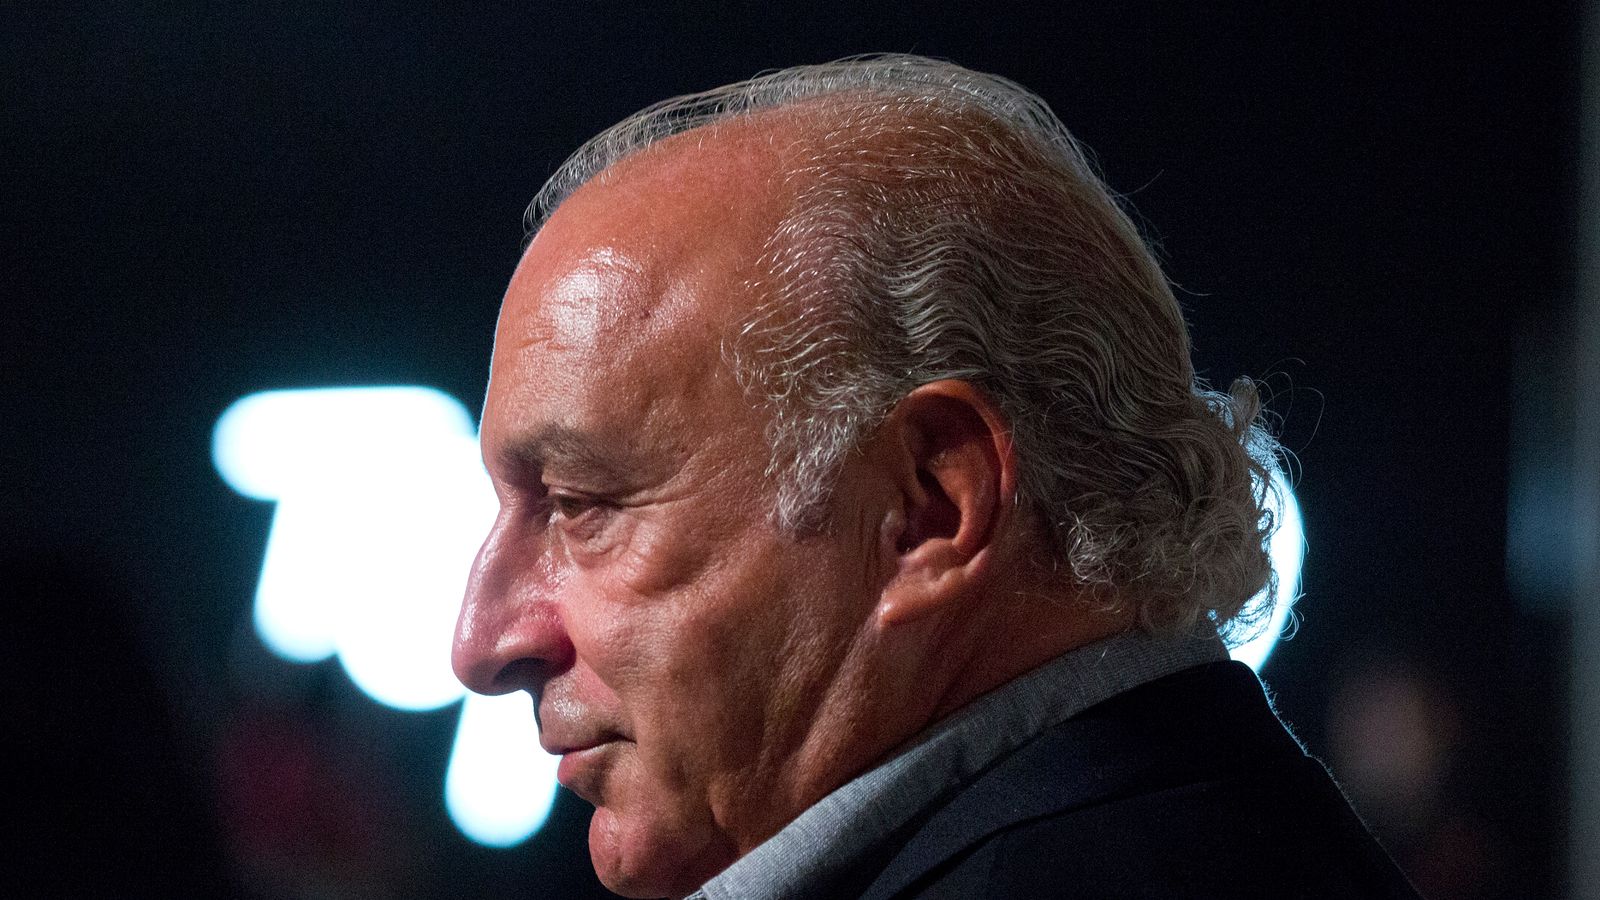 Sir Philip Green case What you need to know Politics News Sky News